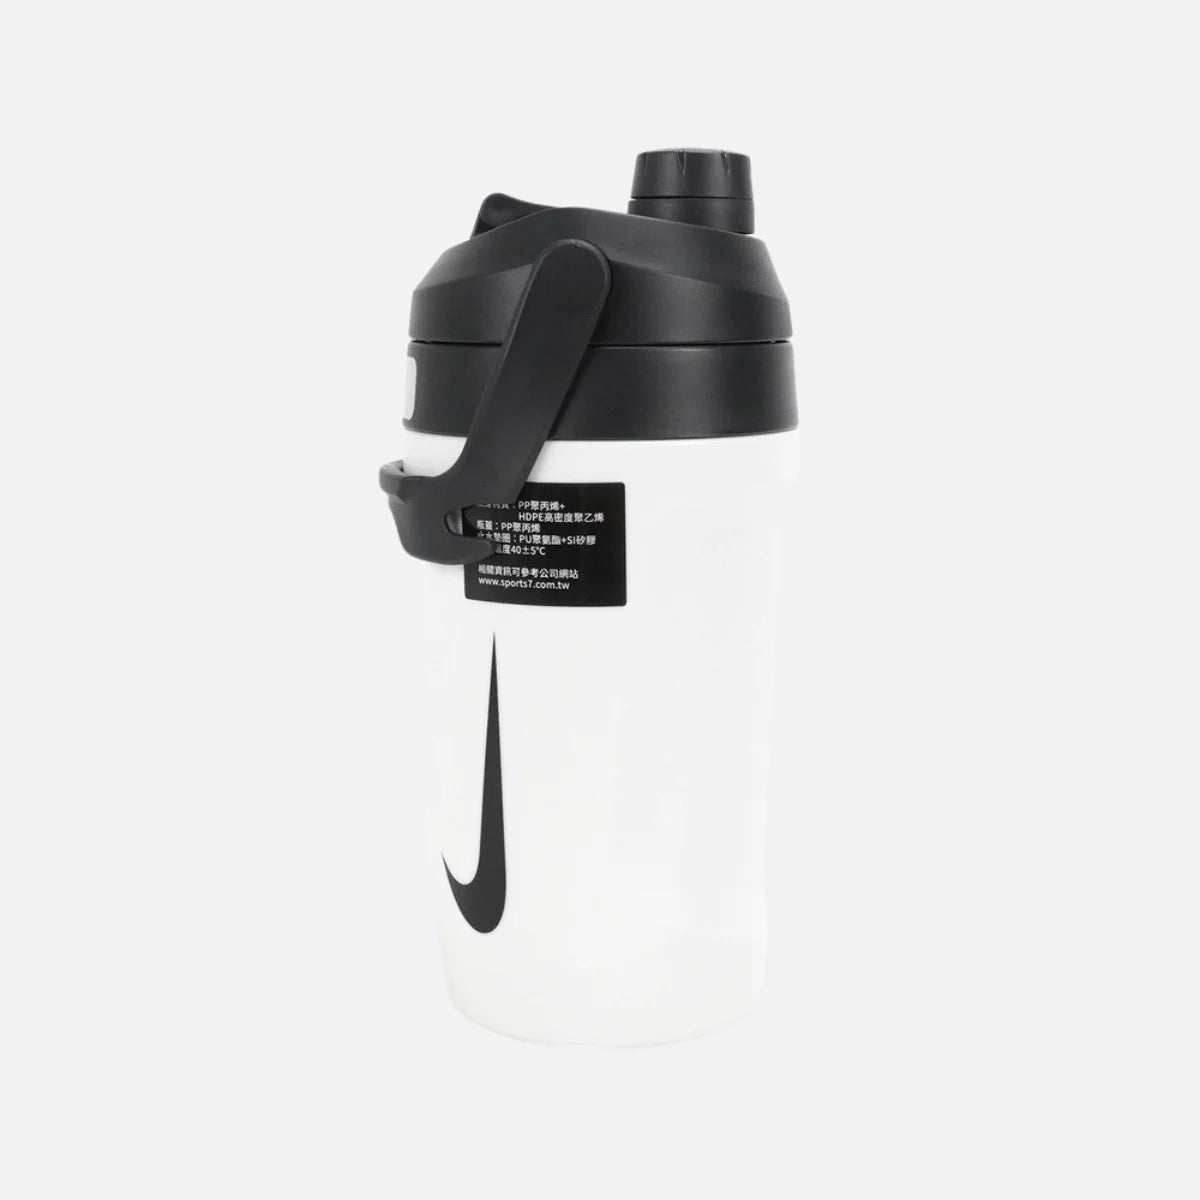 Nike Fuel Insulated Jug 1.2L -GAME ROYAL/BLACK/WHITE/BLACK/ANTHRACITE/MINT FOAM/ANTHRACITE/WHITE